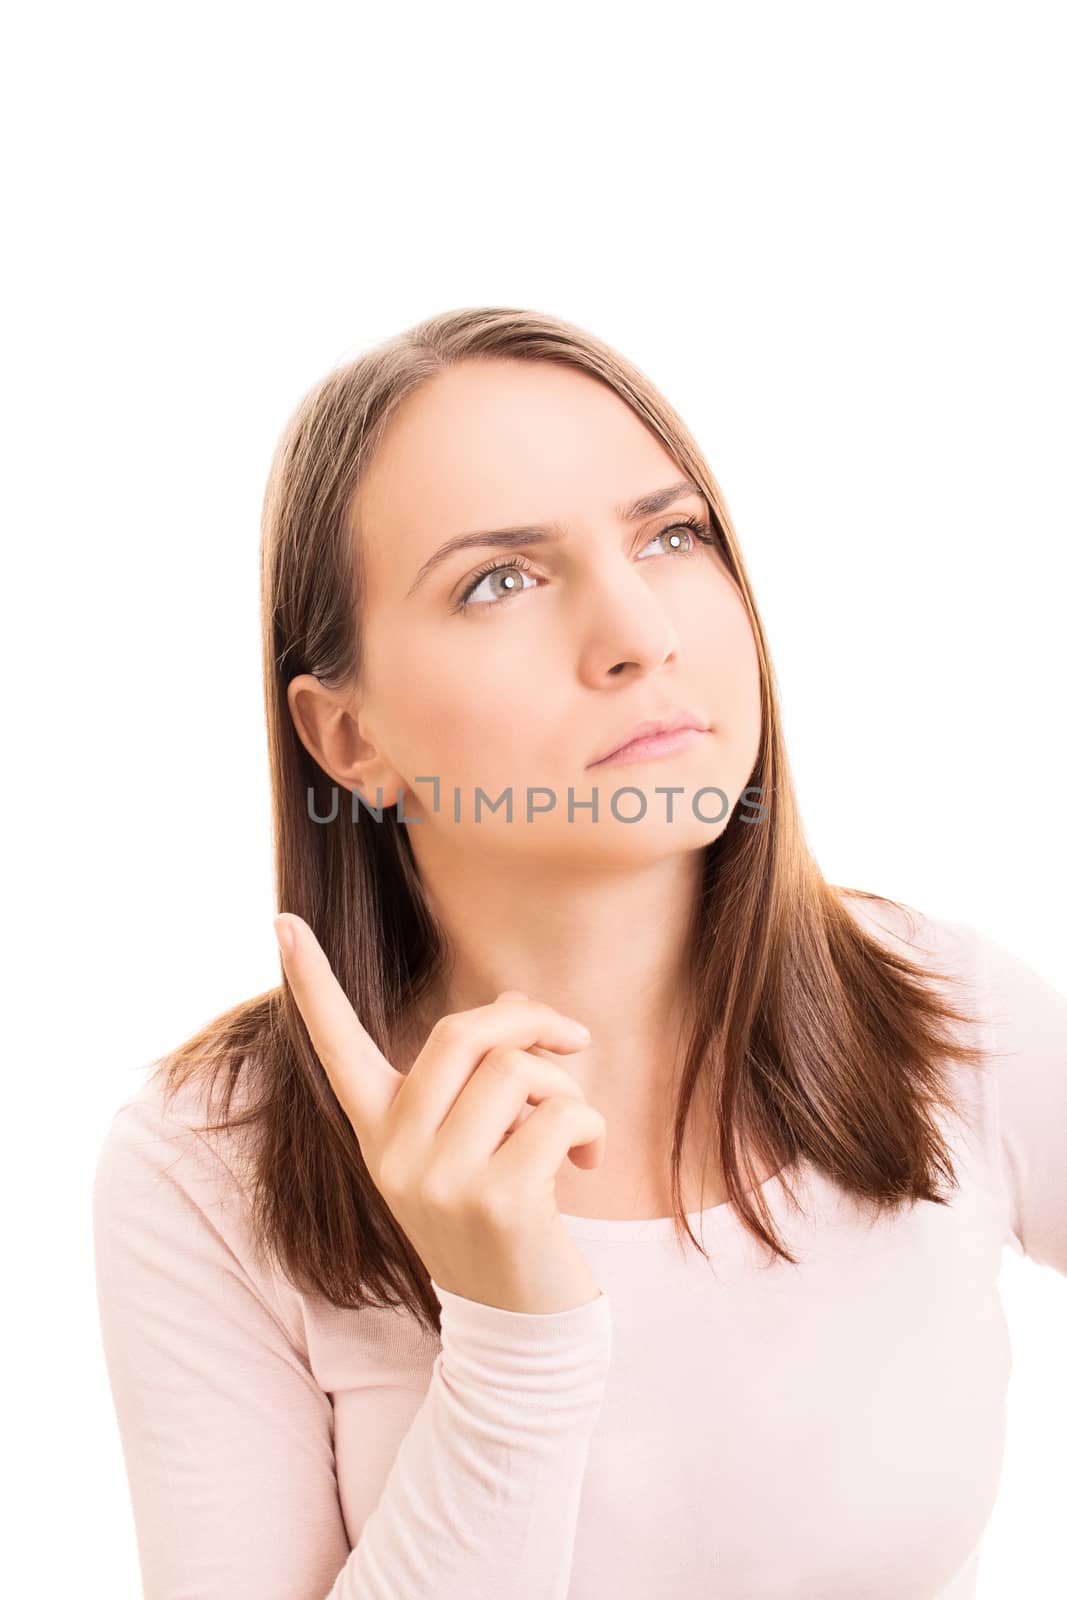 Beautiful young girl figuring out an idea she had before, isolated on white background.